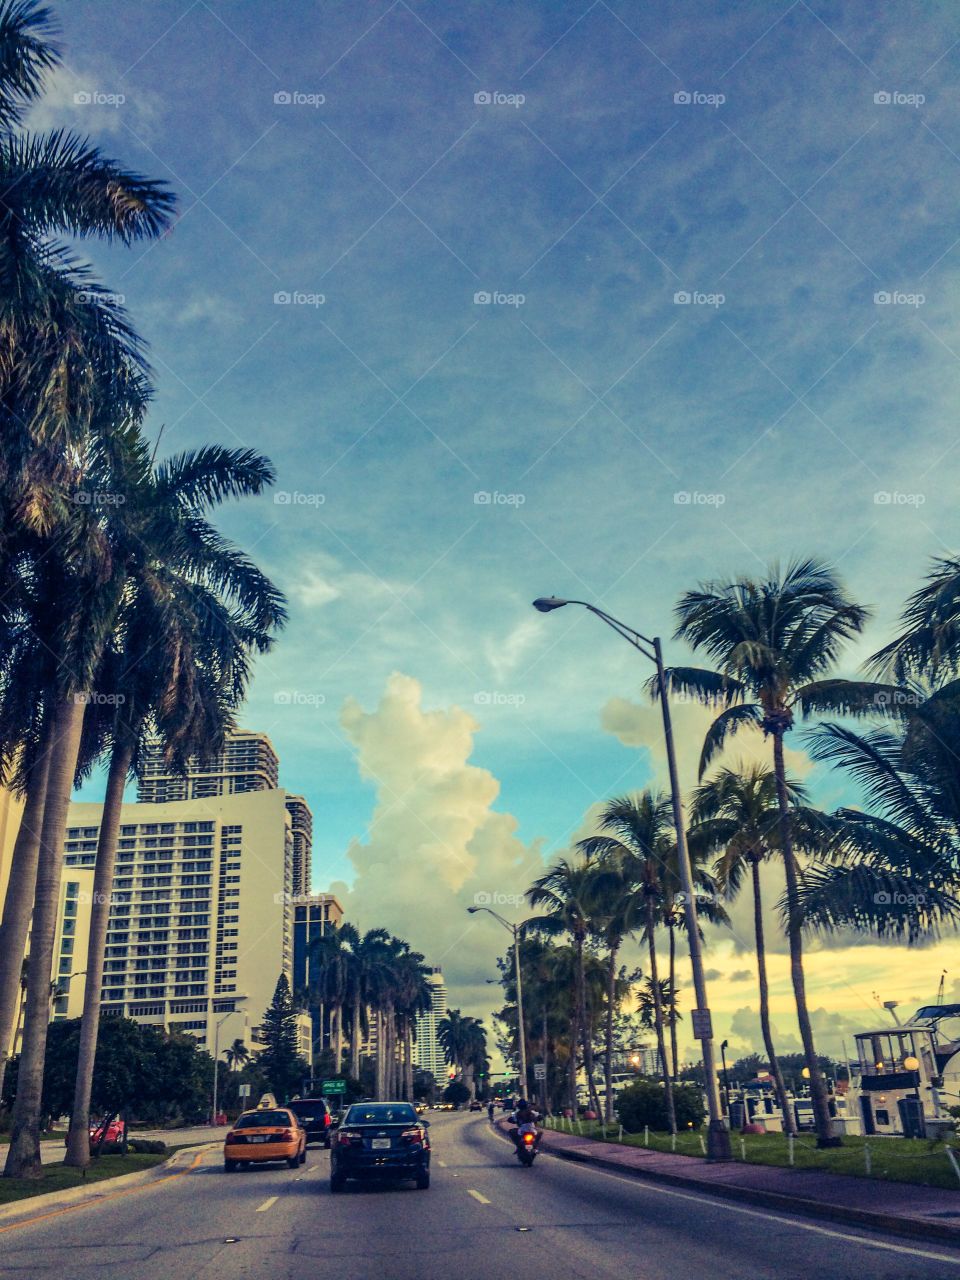 Just another beautiful day - South Beach, Miami 